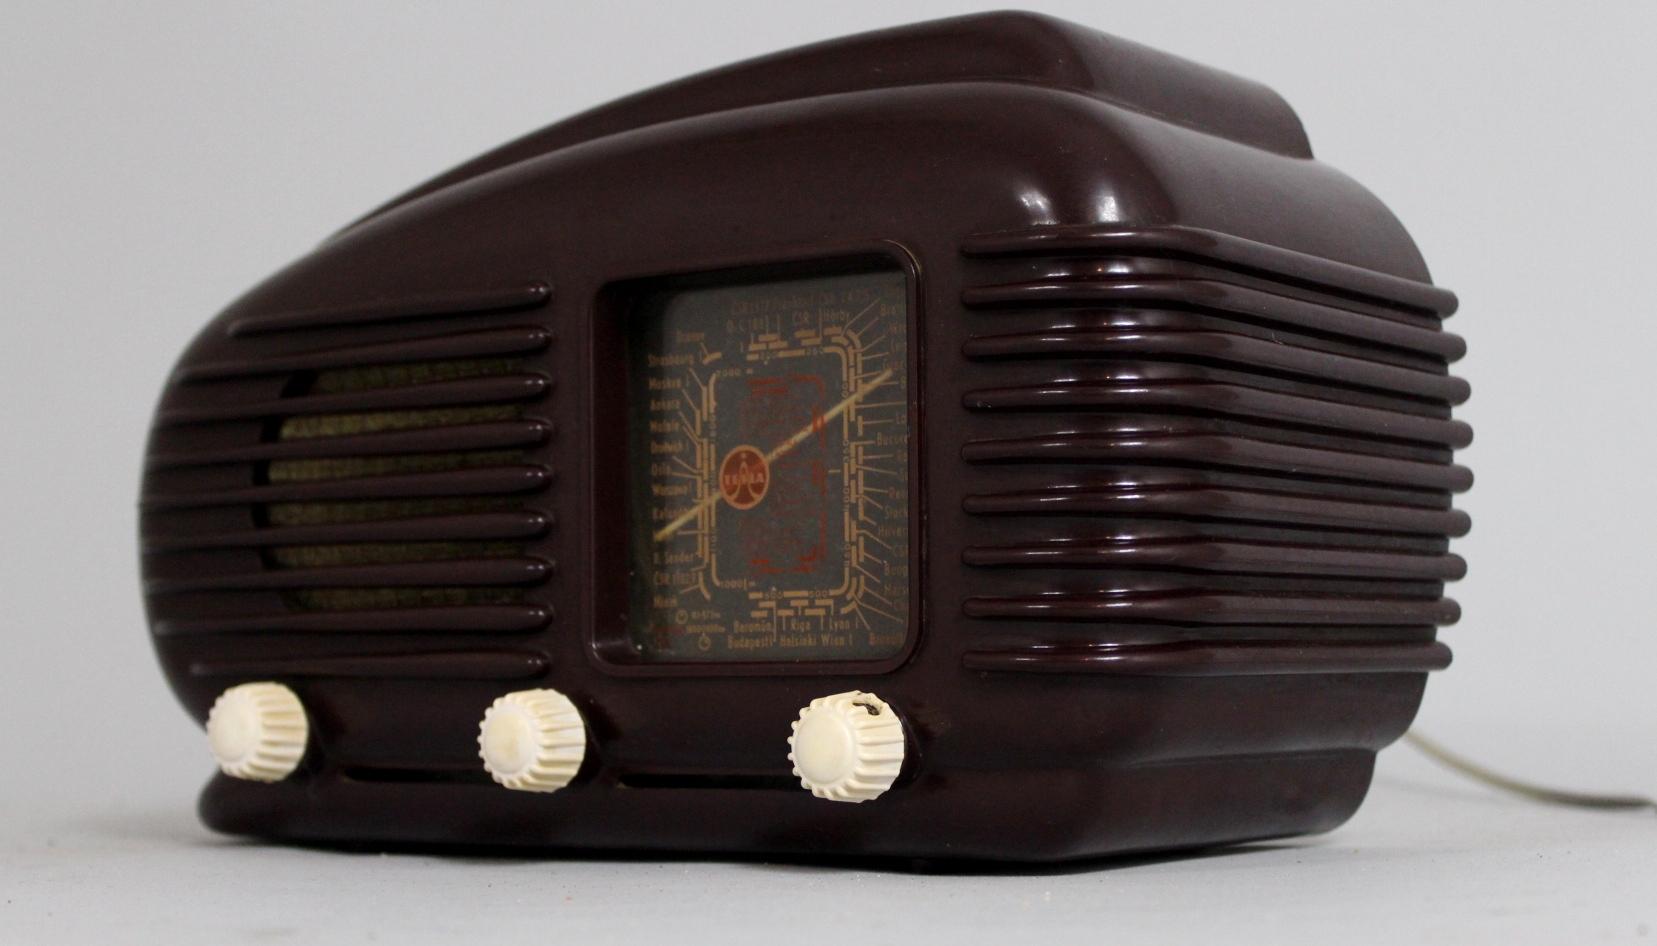 Bakelite radio Talisman made by Tesla is from the 1950s. It is in very good working condition. Original plug connector.